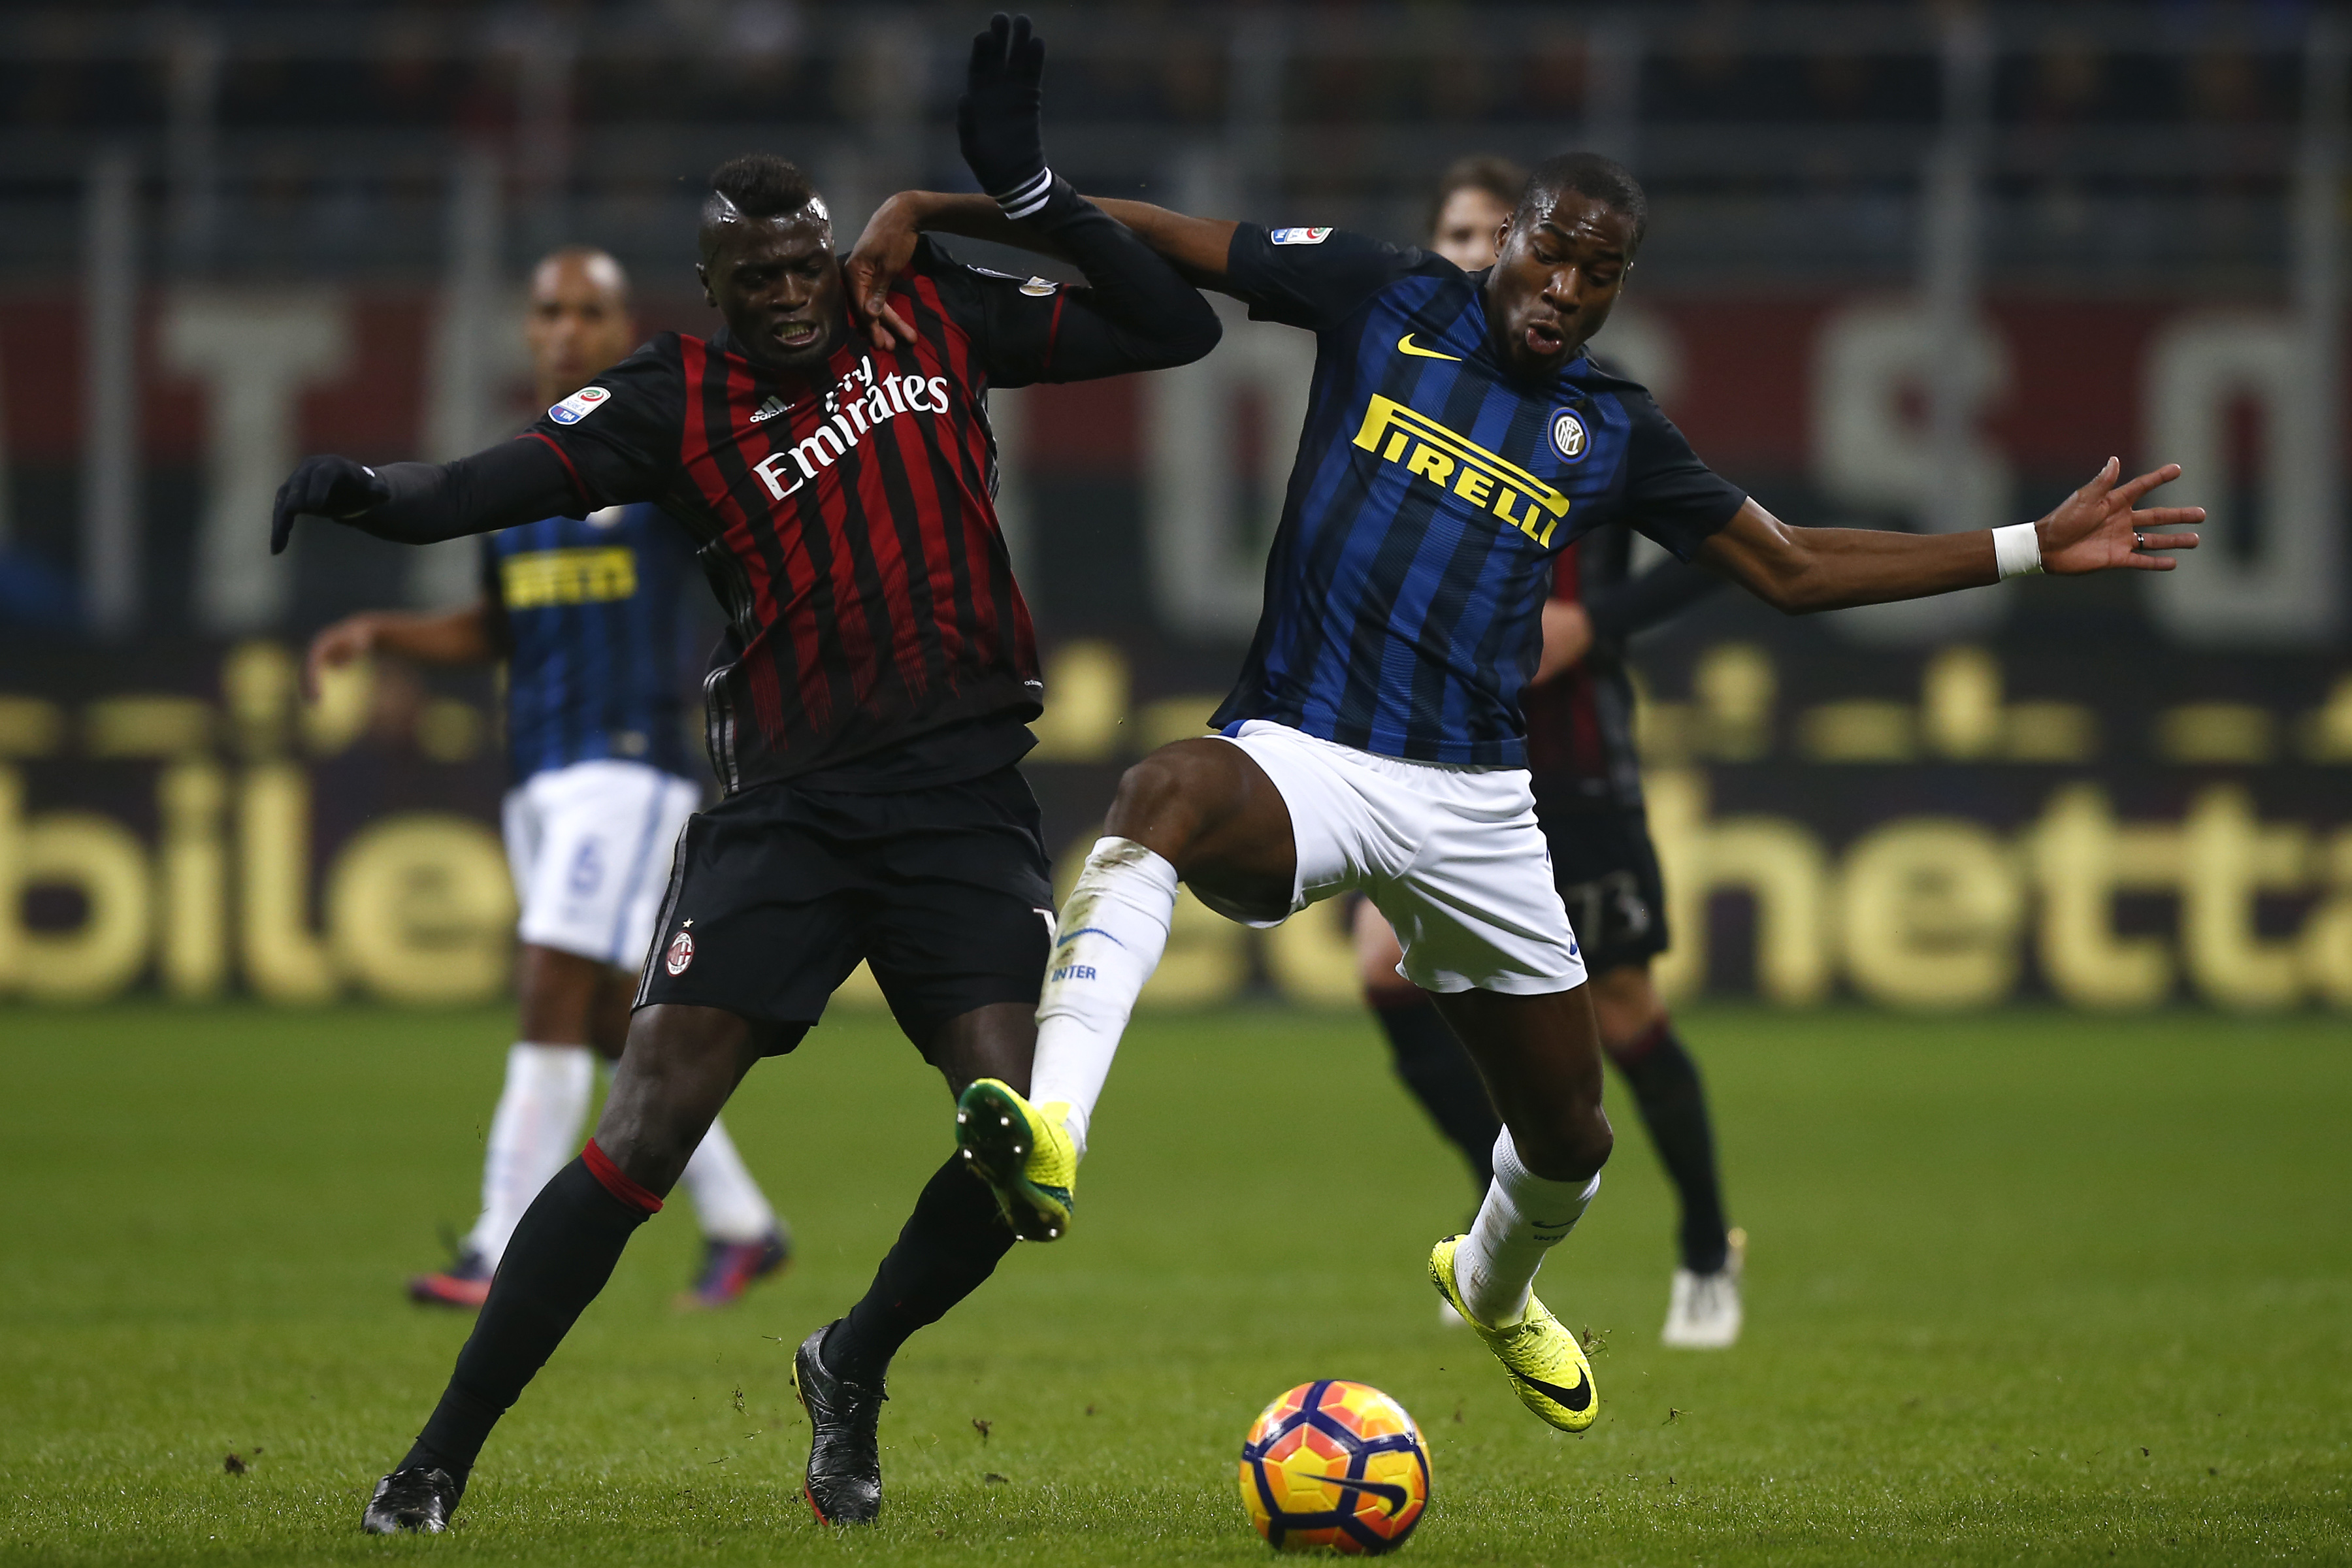 AC Milan's forward Mbaye Niang of France (L) fights for the ball with Inter Milan's midfielder Geoffrey Kondogbia from France during the Italian Serie A football match AC Milan Vs Inter Milan on November 20, 2016 at the 'San Siro Stadium' in Milan.  / AFP / MARCO BERTORELLO        (Photo credit should read MARCO BERTORELLO/AFP/Getty Images)